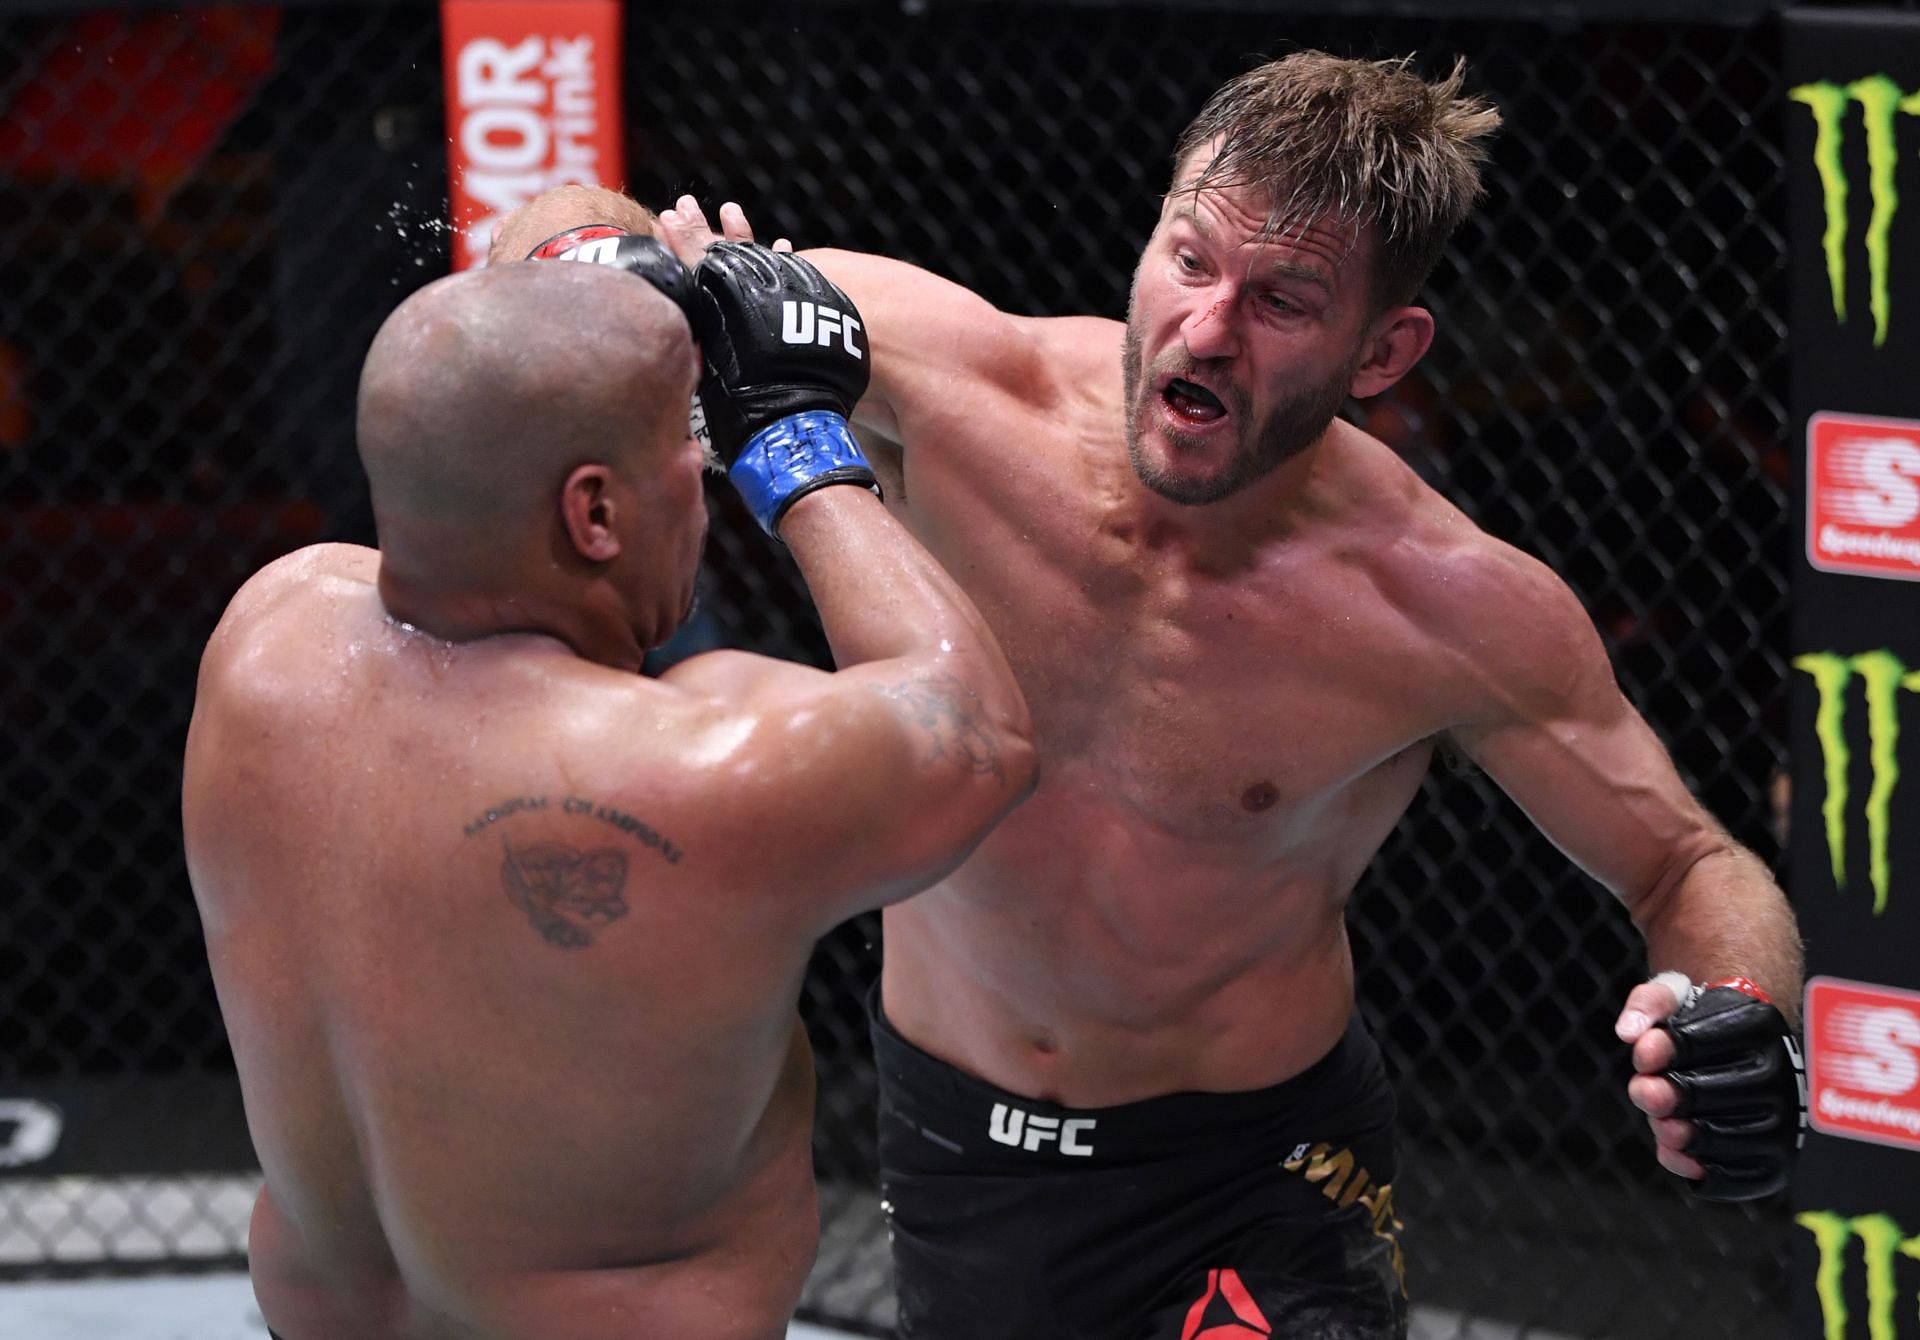 Stipe Miocic welcoming Jon Jones to the heavyweight division could definitely headline a big UFC event